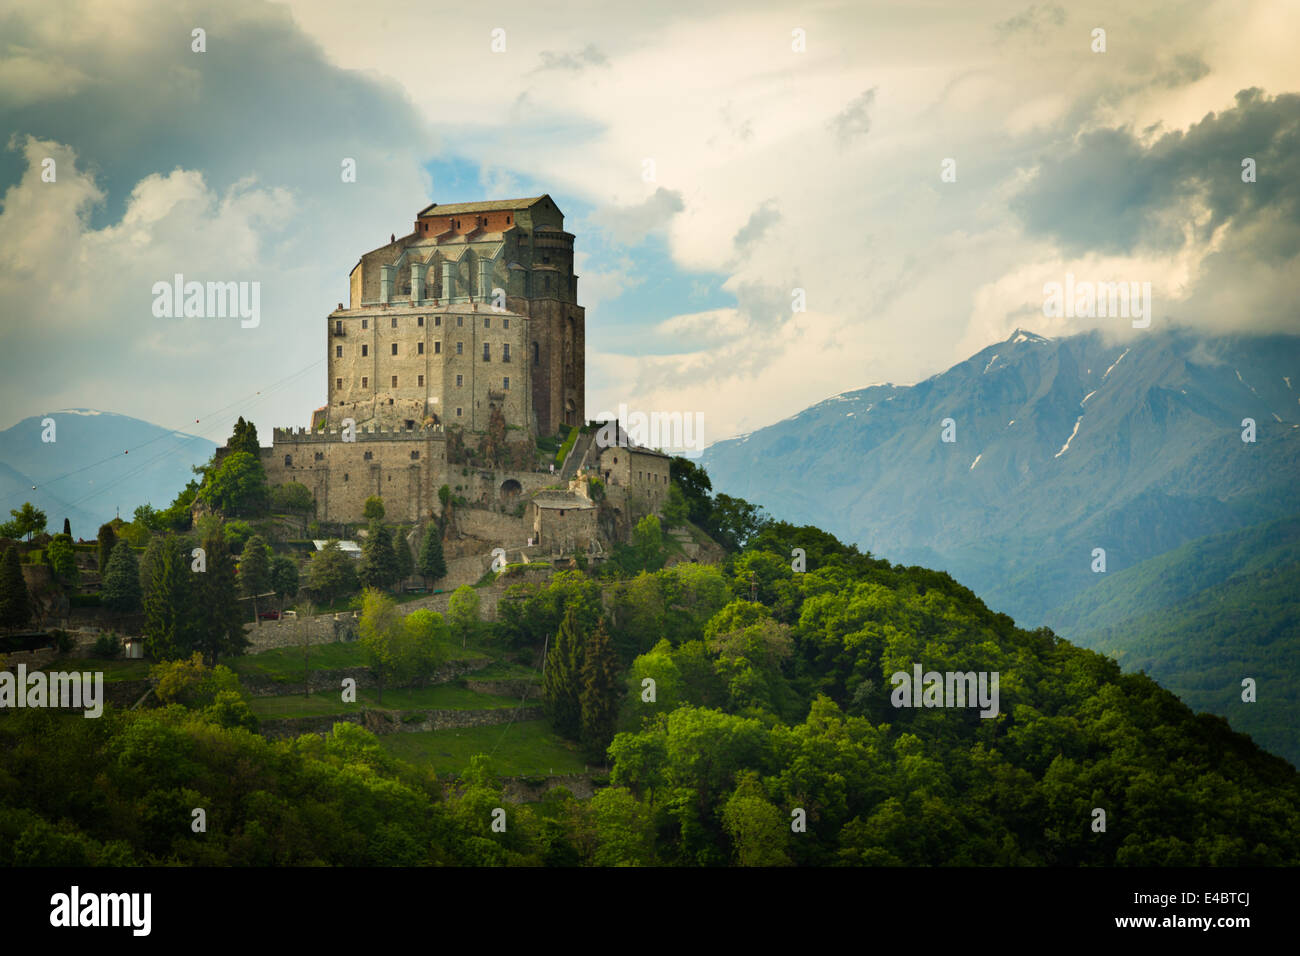 Monastery church of Sacra di San Michele in the Susa Valley, Italy. The Alps rise up in the background with Rocciamelone the mountain to the right. Stock Photo